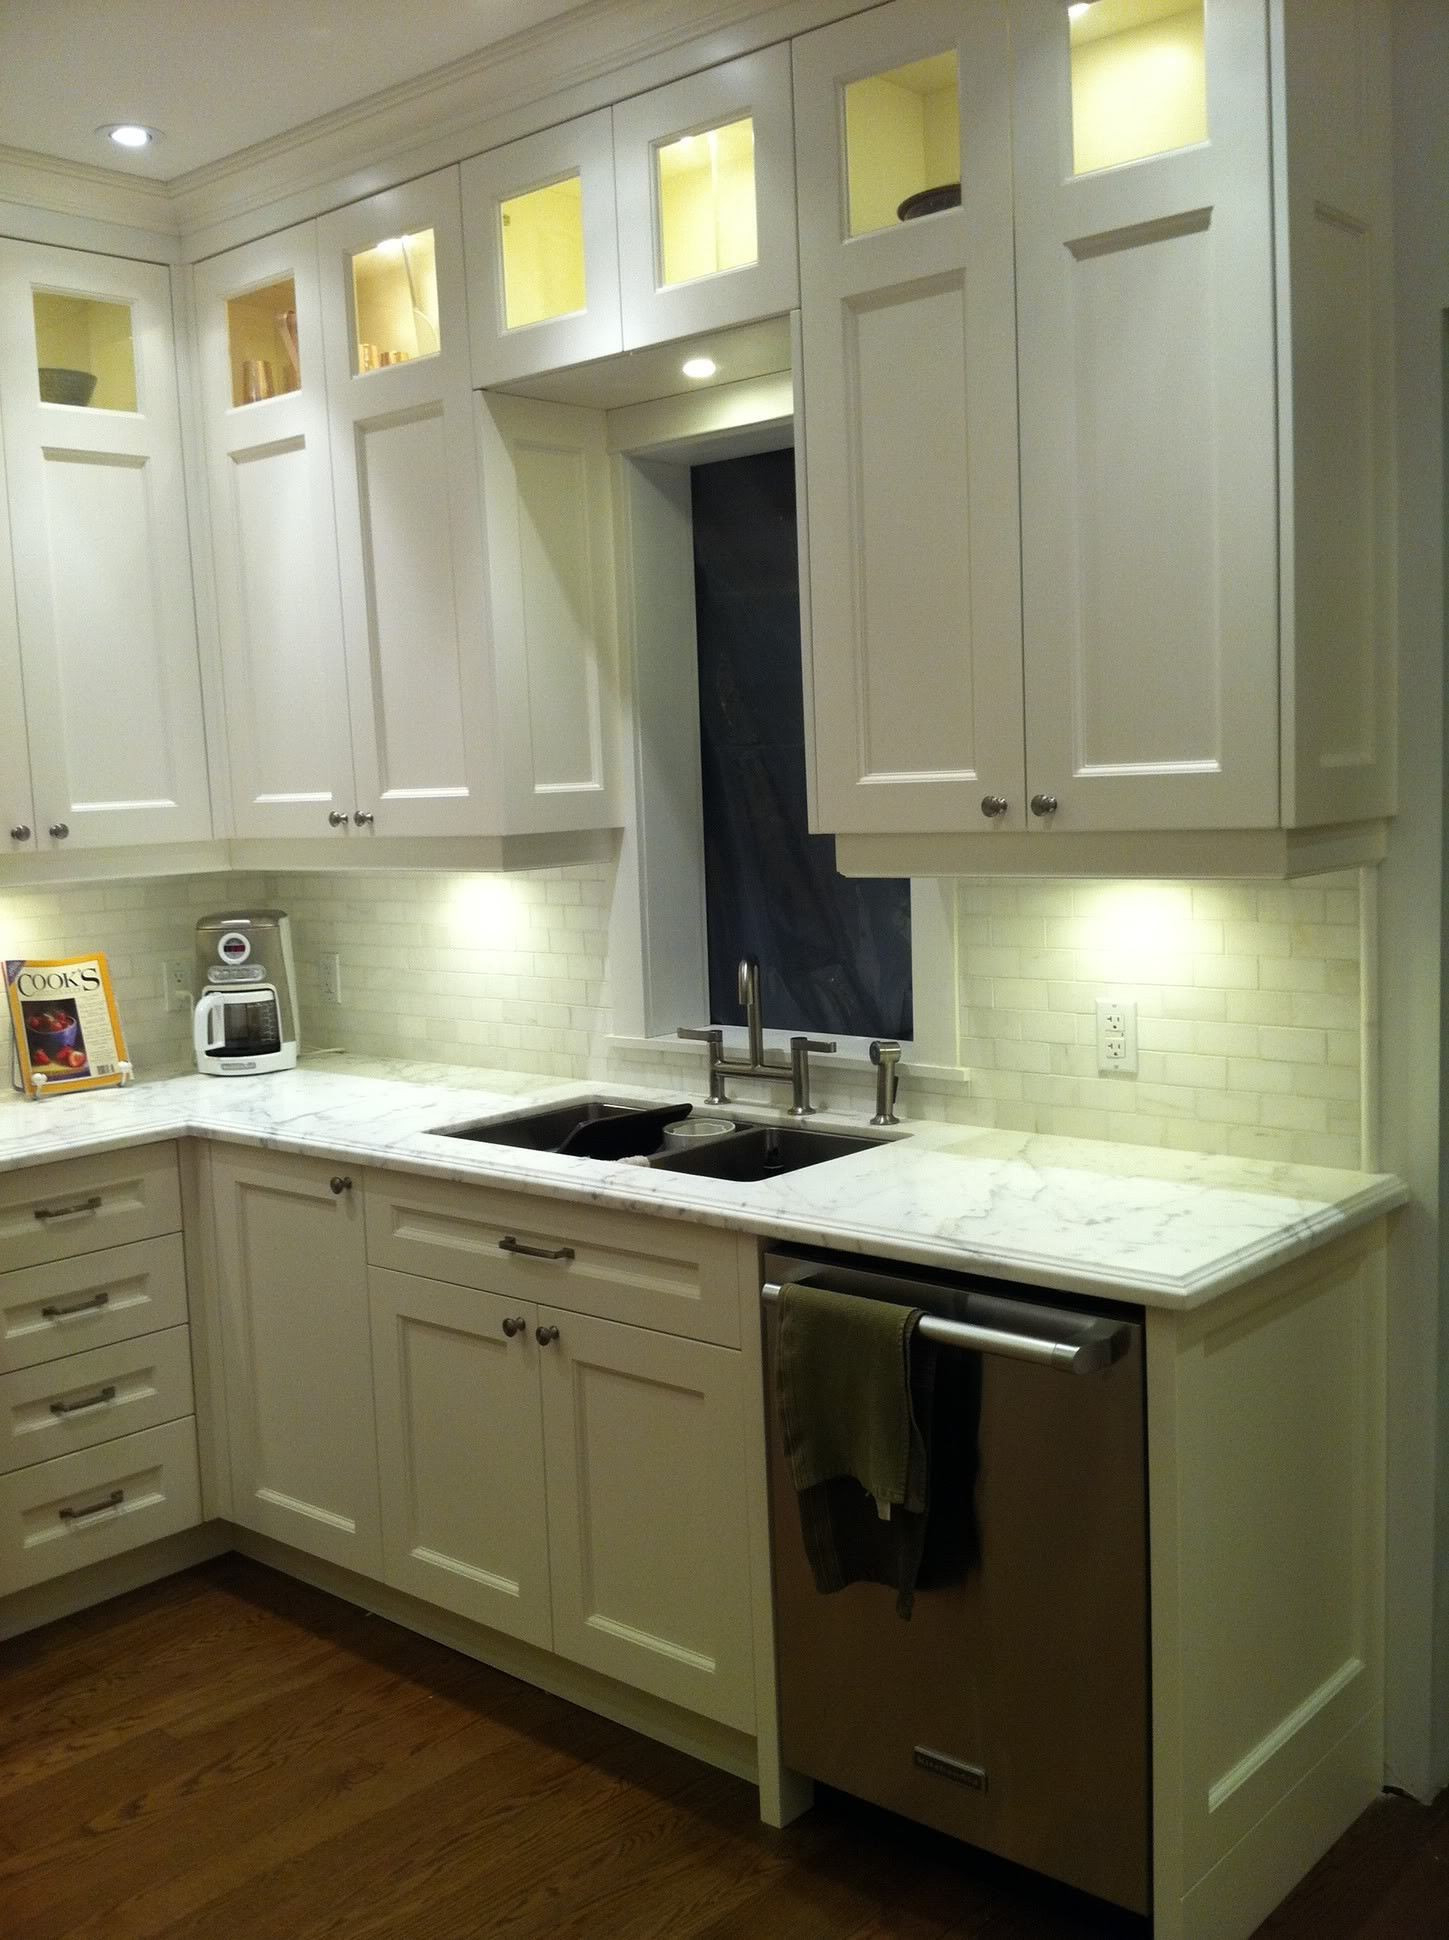 42 Inch Tall Kitchen Cabinets Beautiful 9 Inch Kitchen Cabinets Of 42 Inch Tall Kitchen Cabinets 